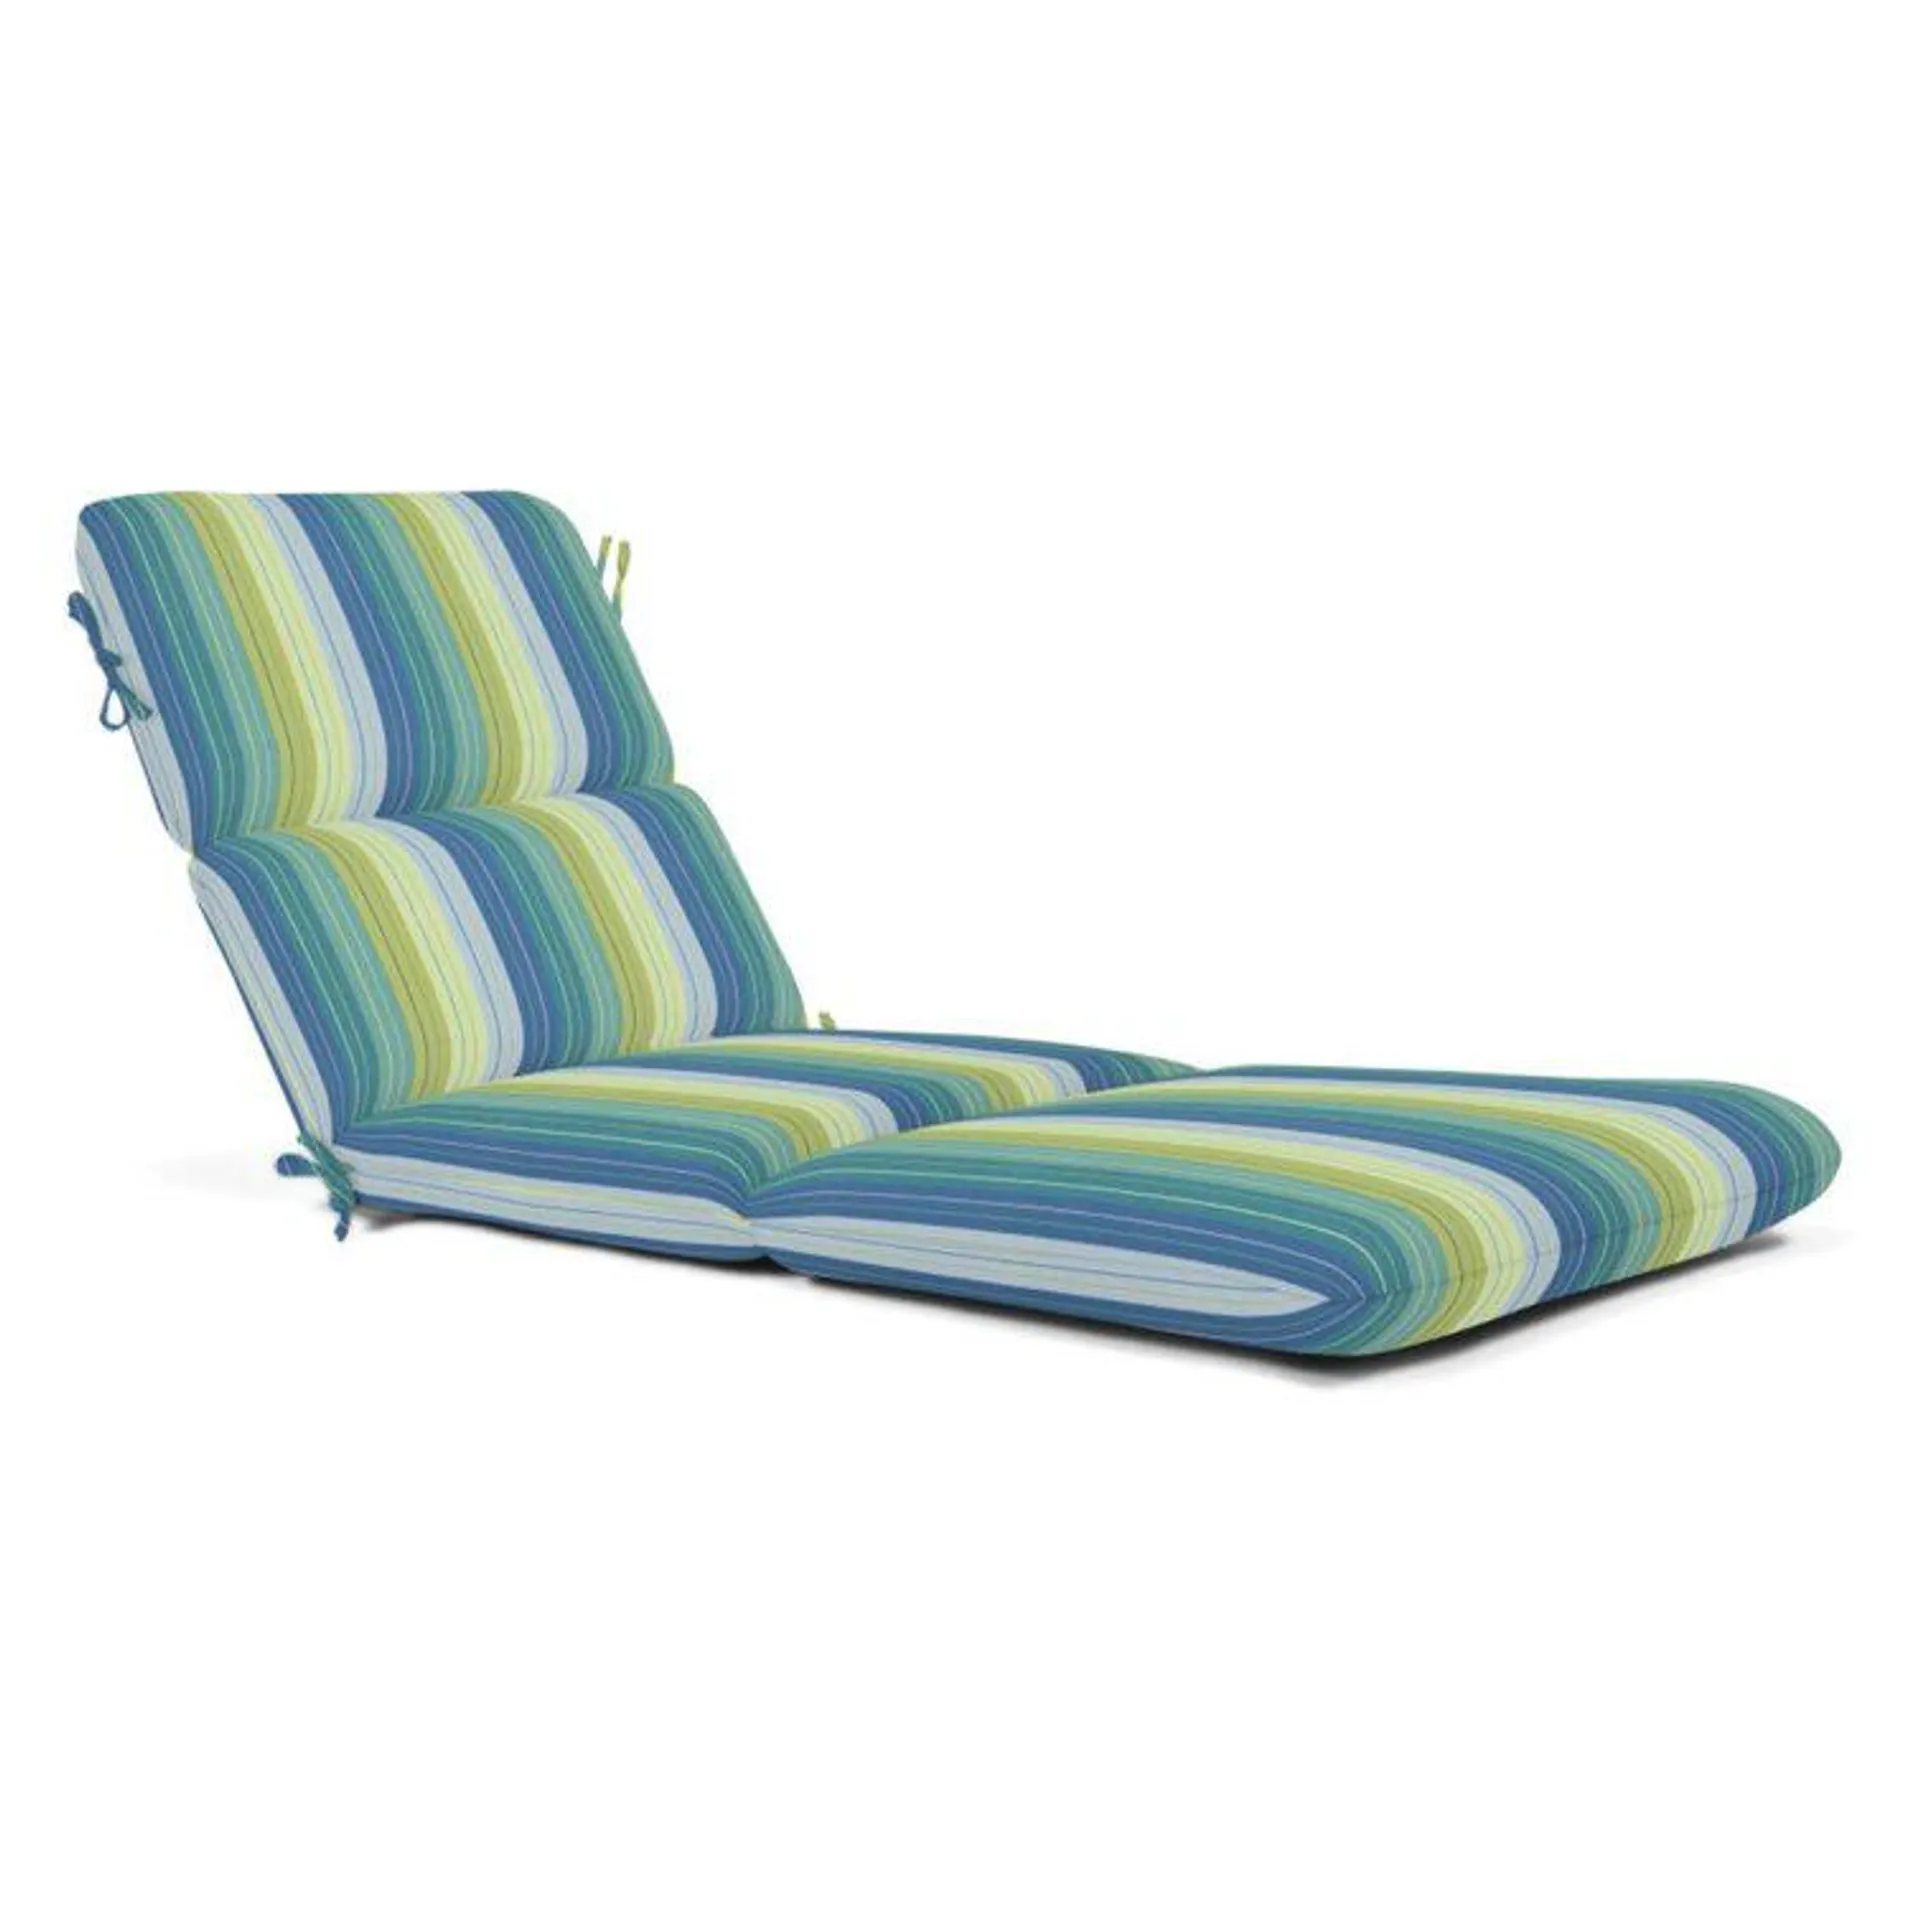 Striped Outdoor Chaise Lounge Cushion